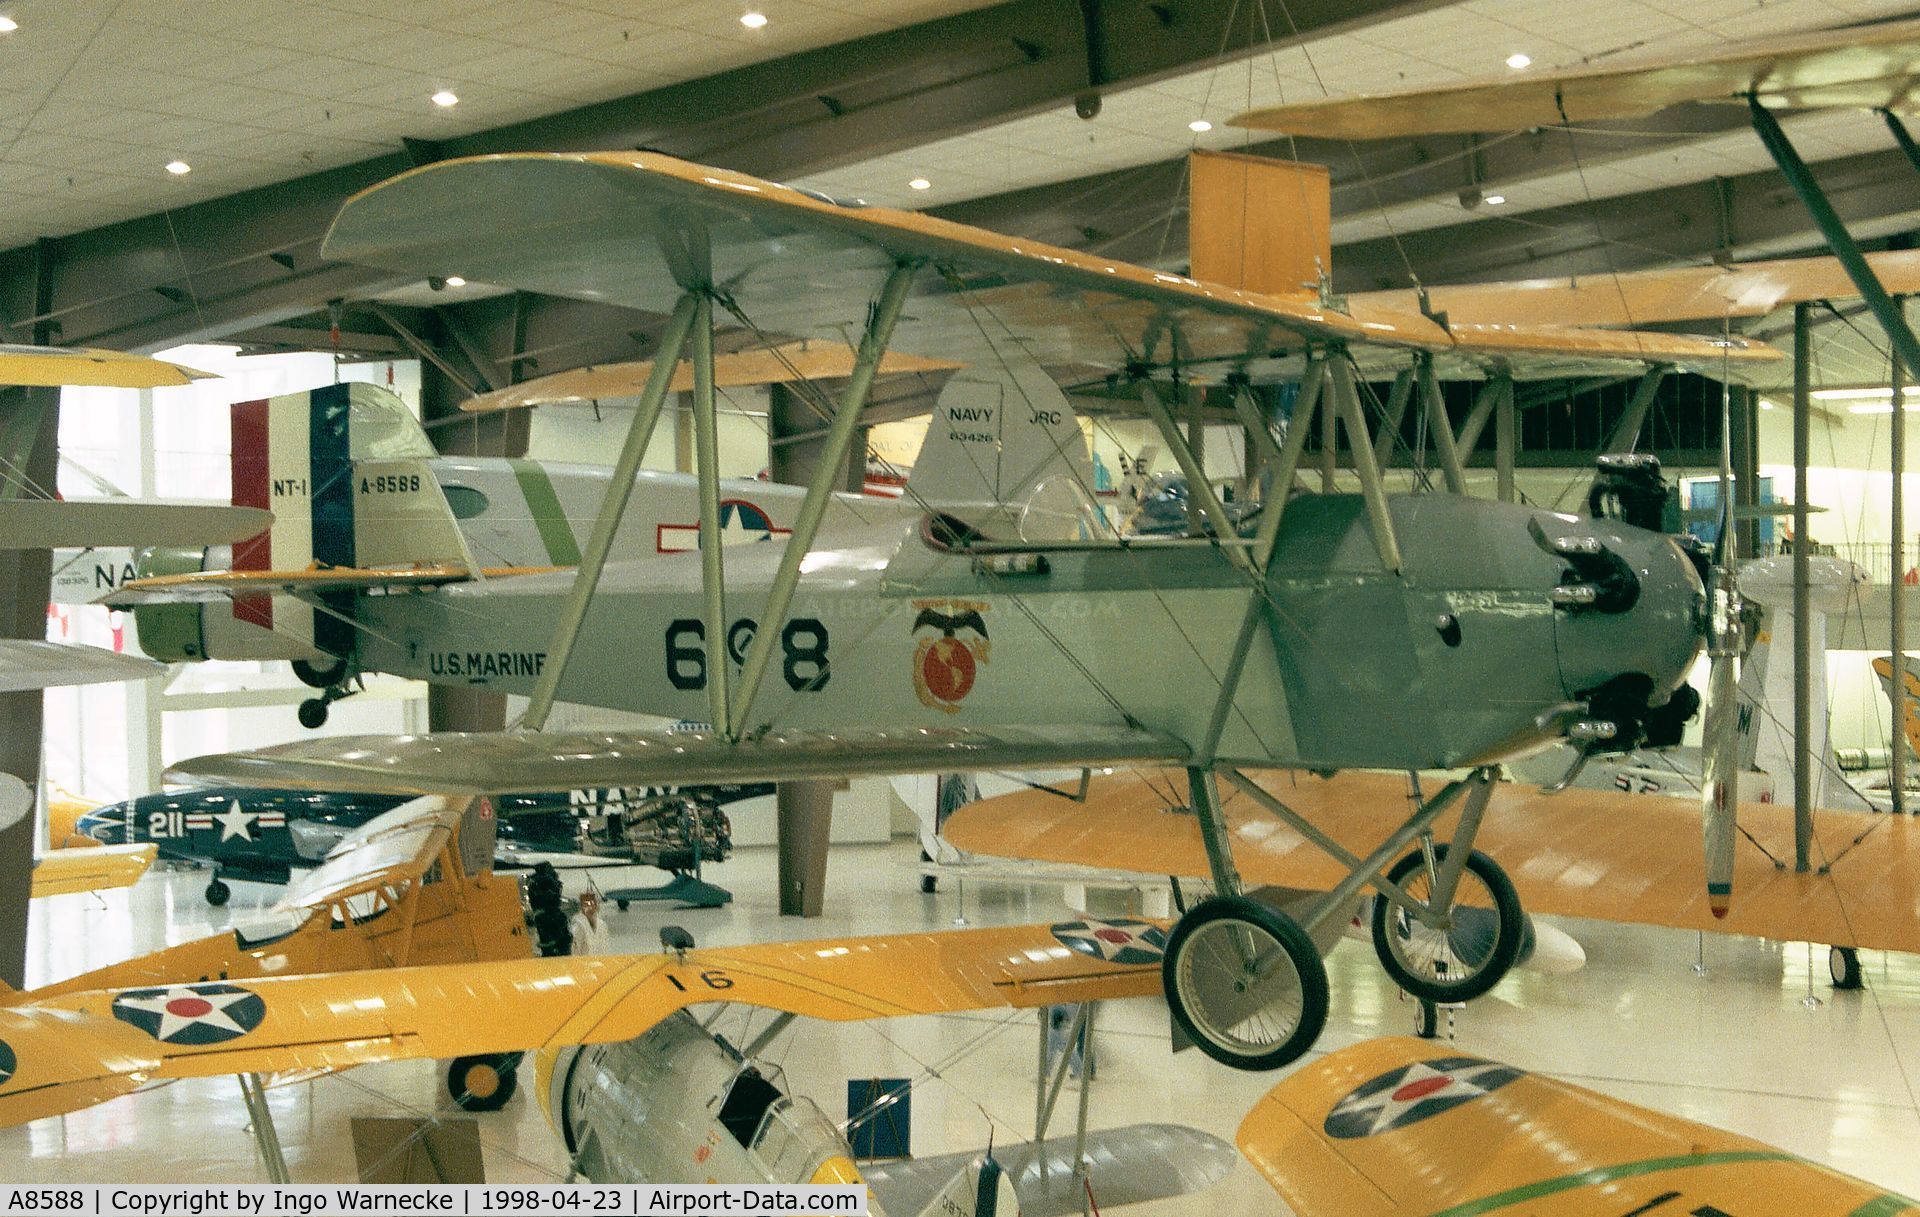 A8588, 1929 New Standard NT-1 C/N 1007, New Standard NT-1 at the Museum of Naval Aviation, Pensacola FL